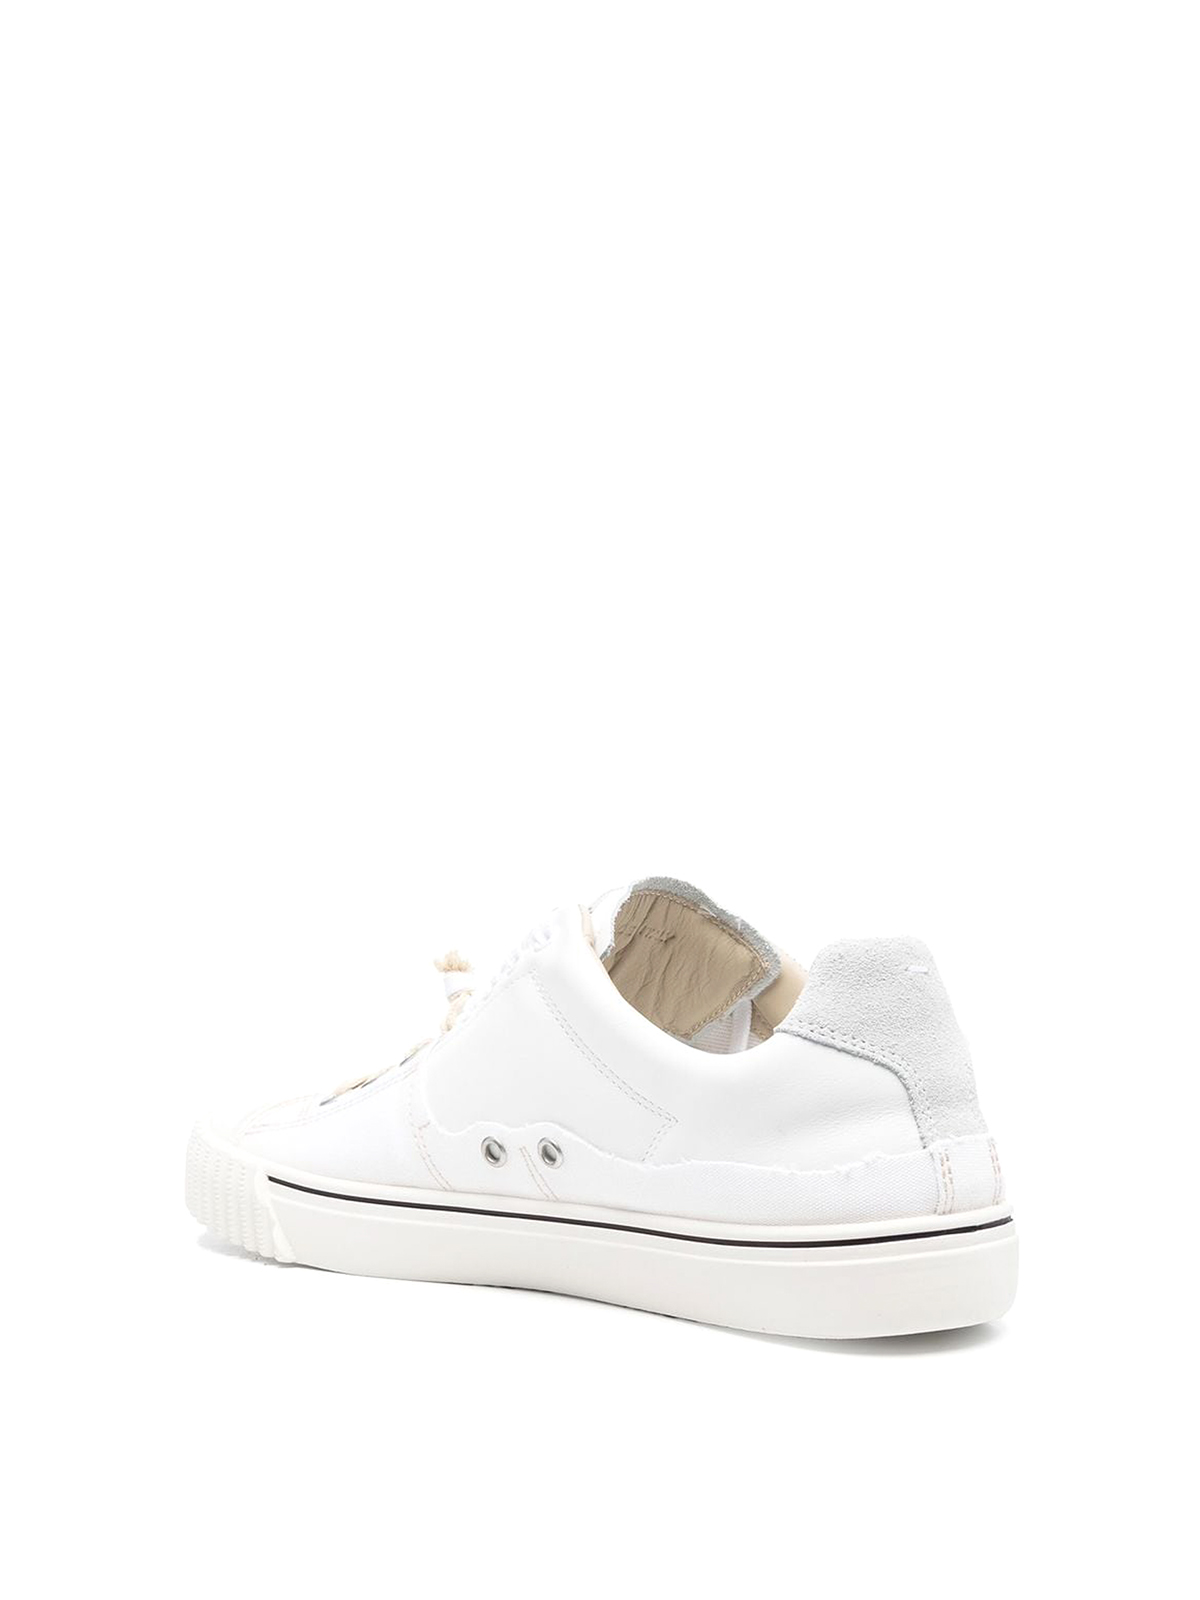 Maison Margiela Low-top lace-up sneakers with eyelet